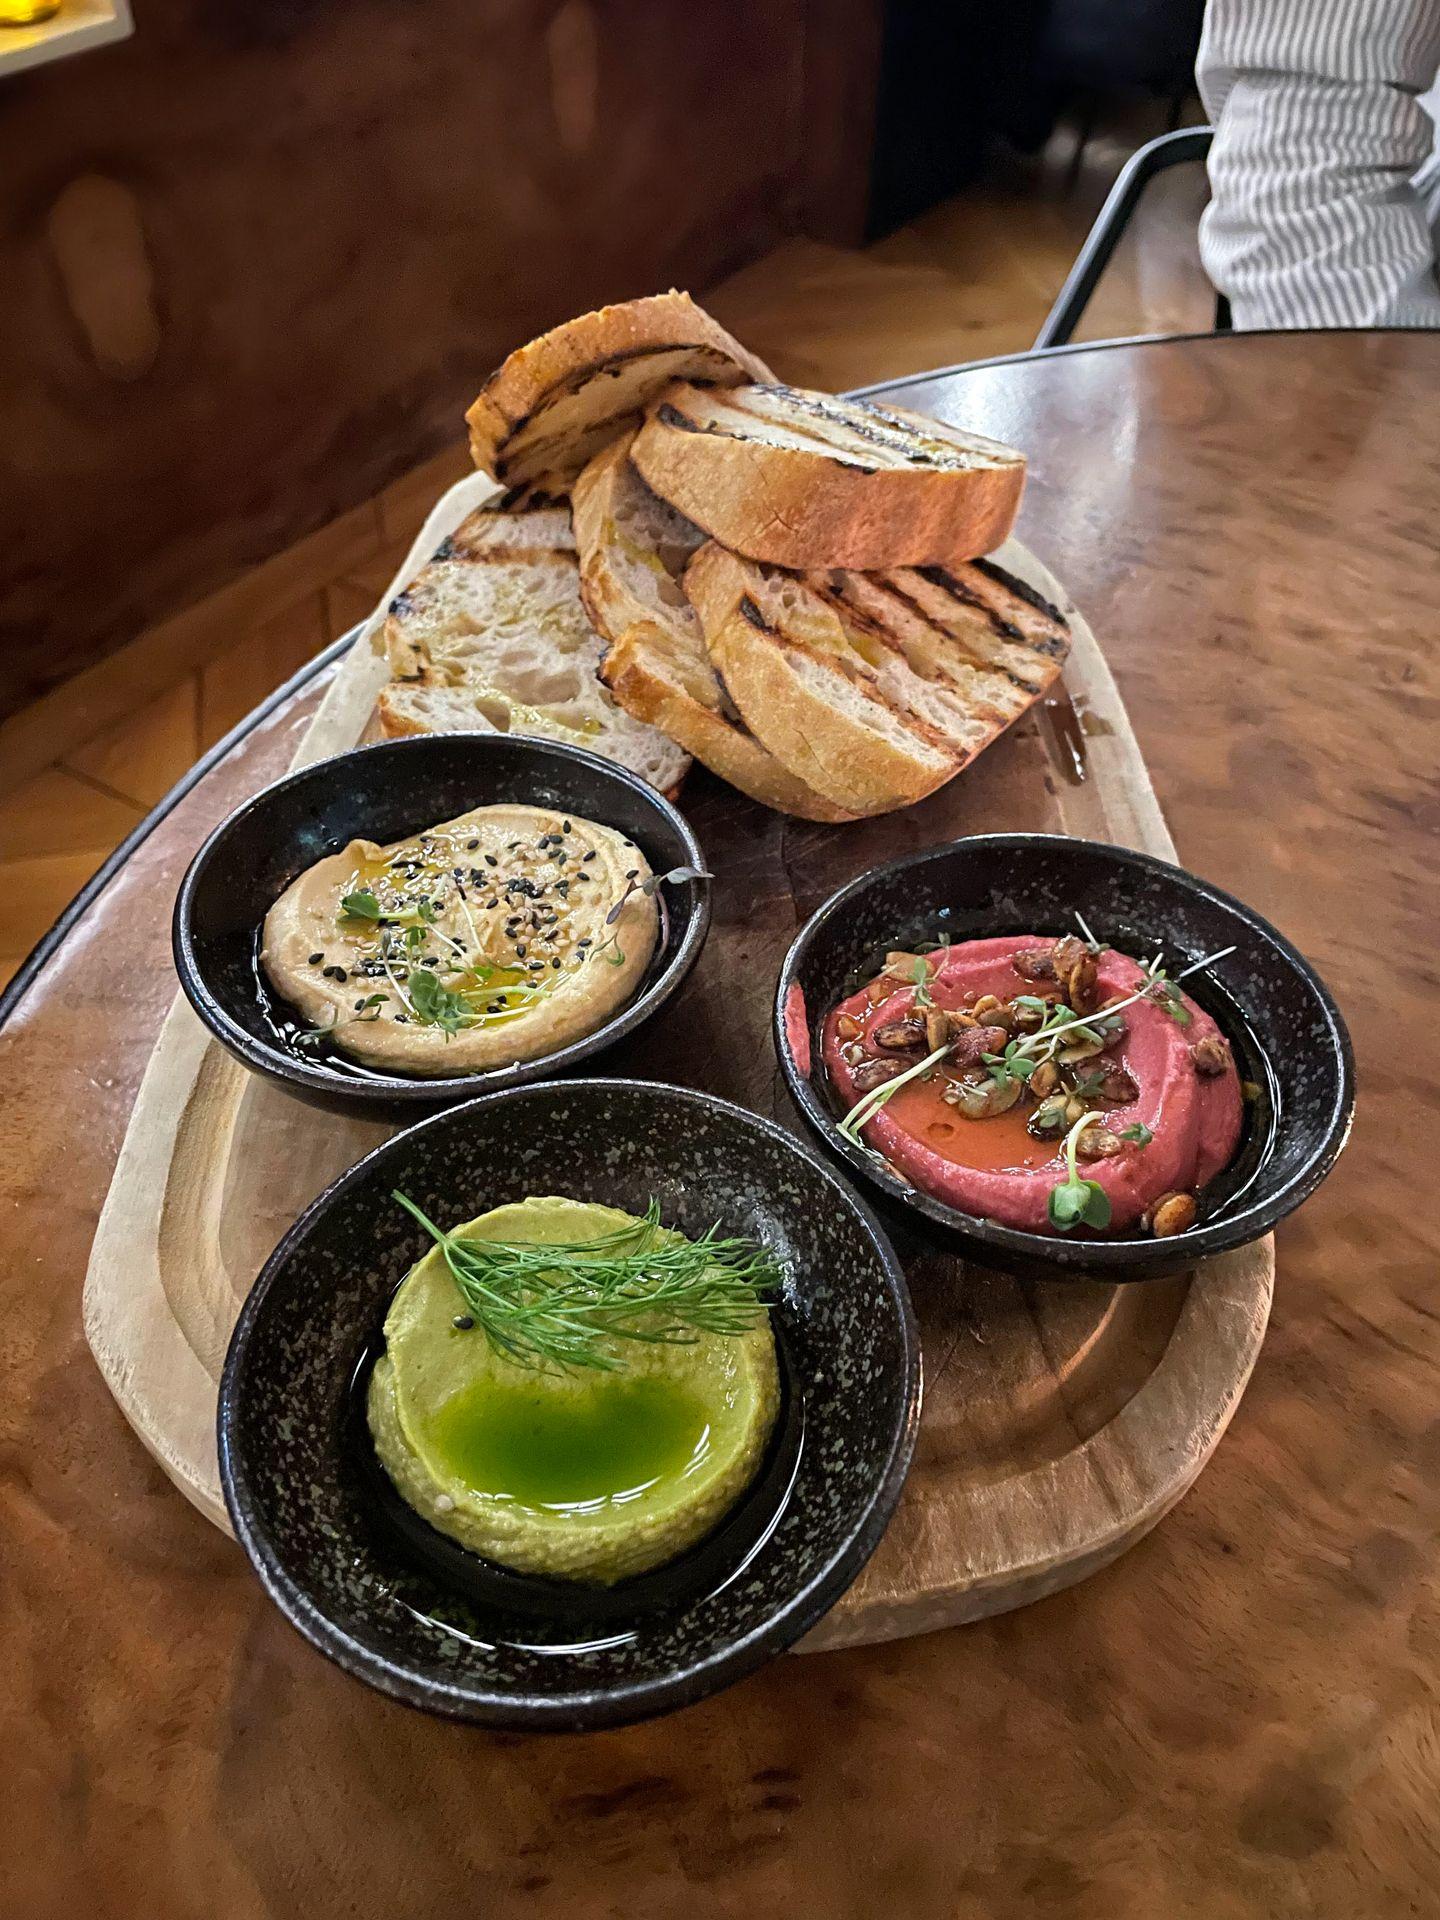 A tray with three colors of hummus and toasted bread.